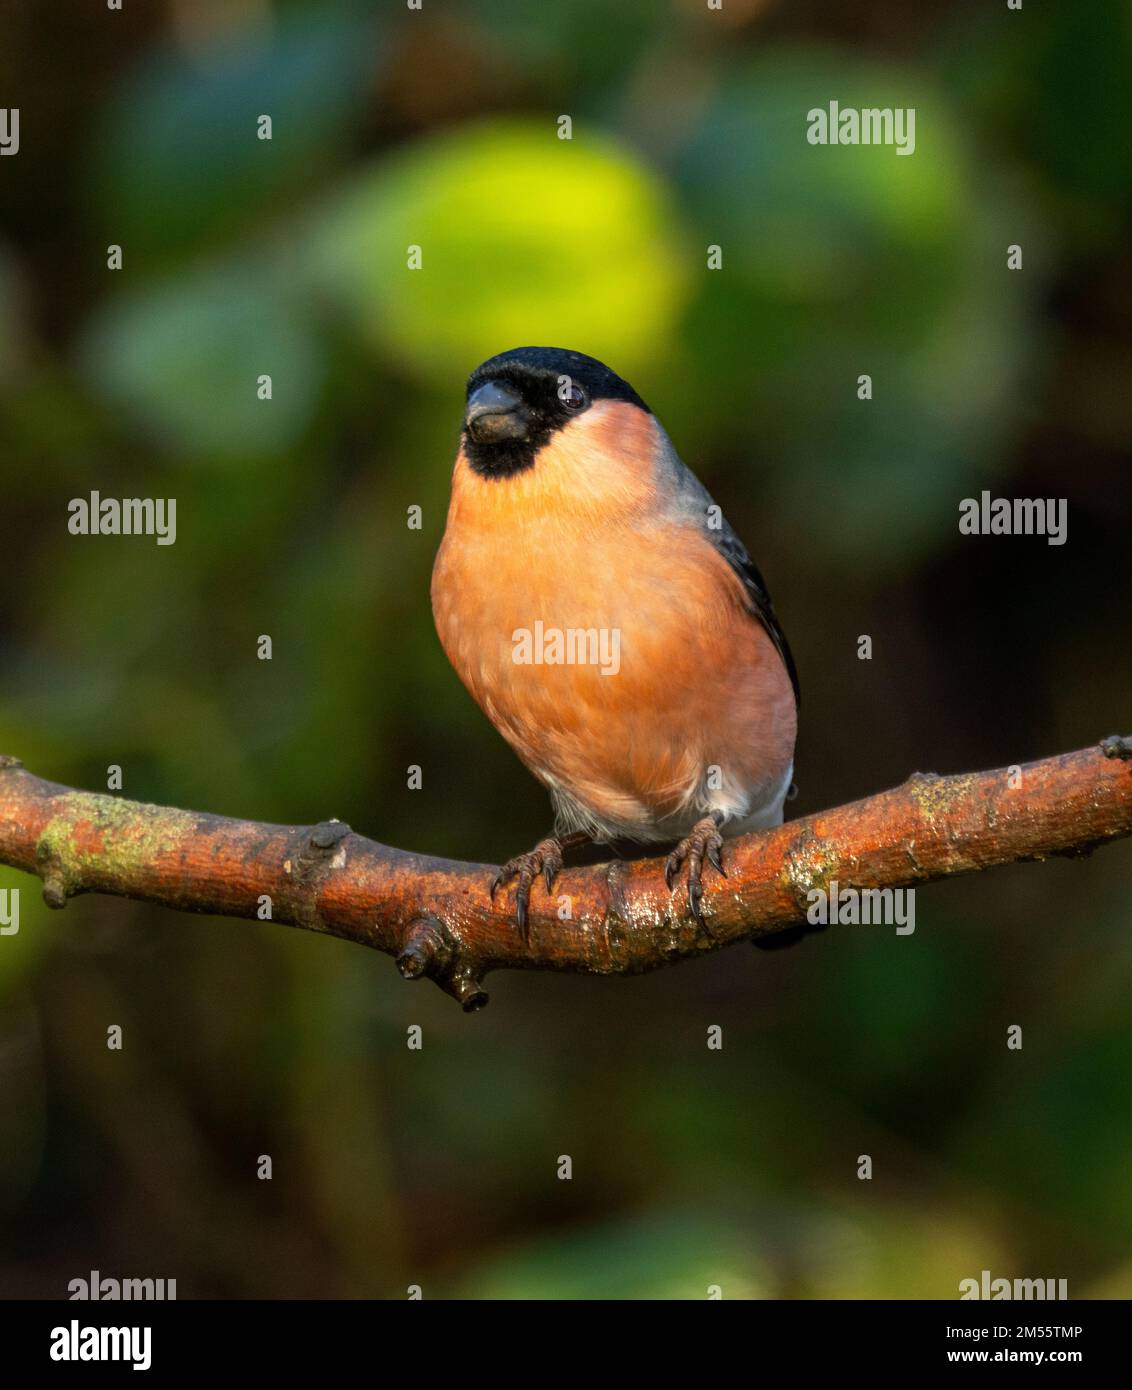 The bullfinch is one of the more beautiful of the UK's finch family. They are shy birds but will become more relaxed around bird feeders during the wi Stock Photo